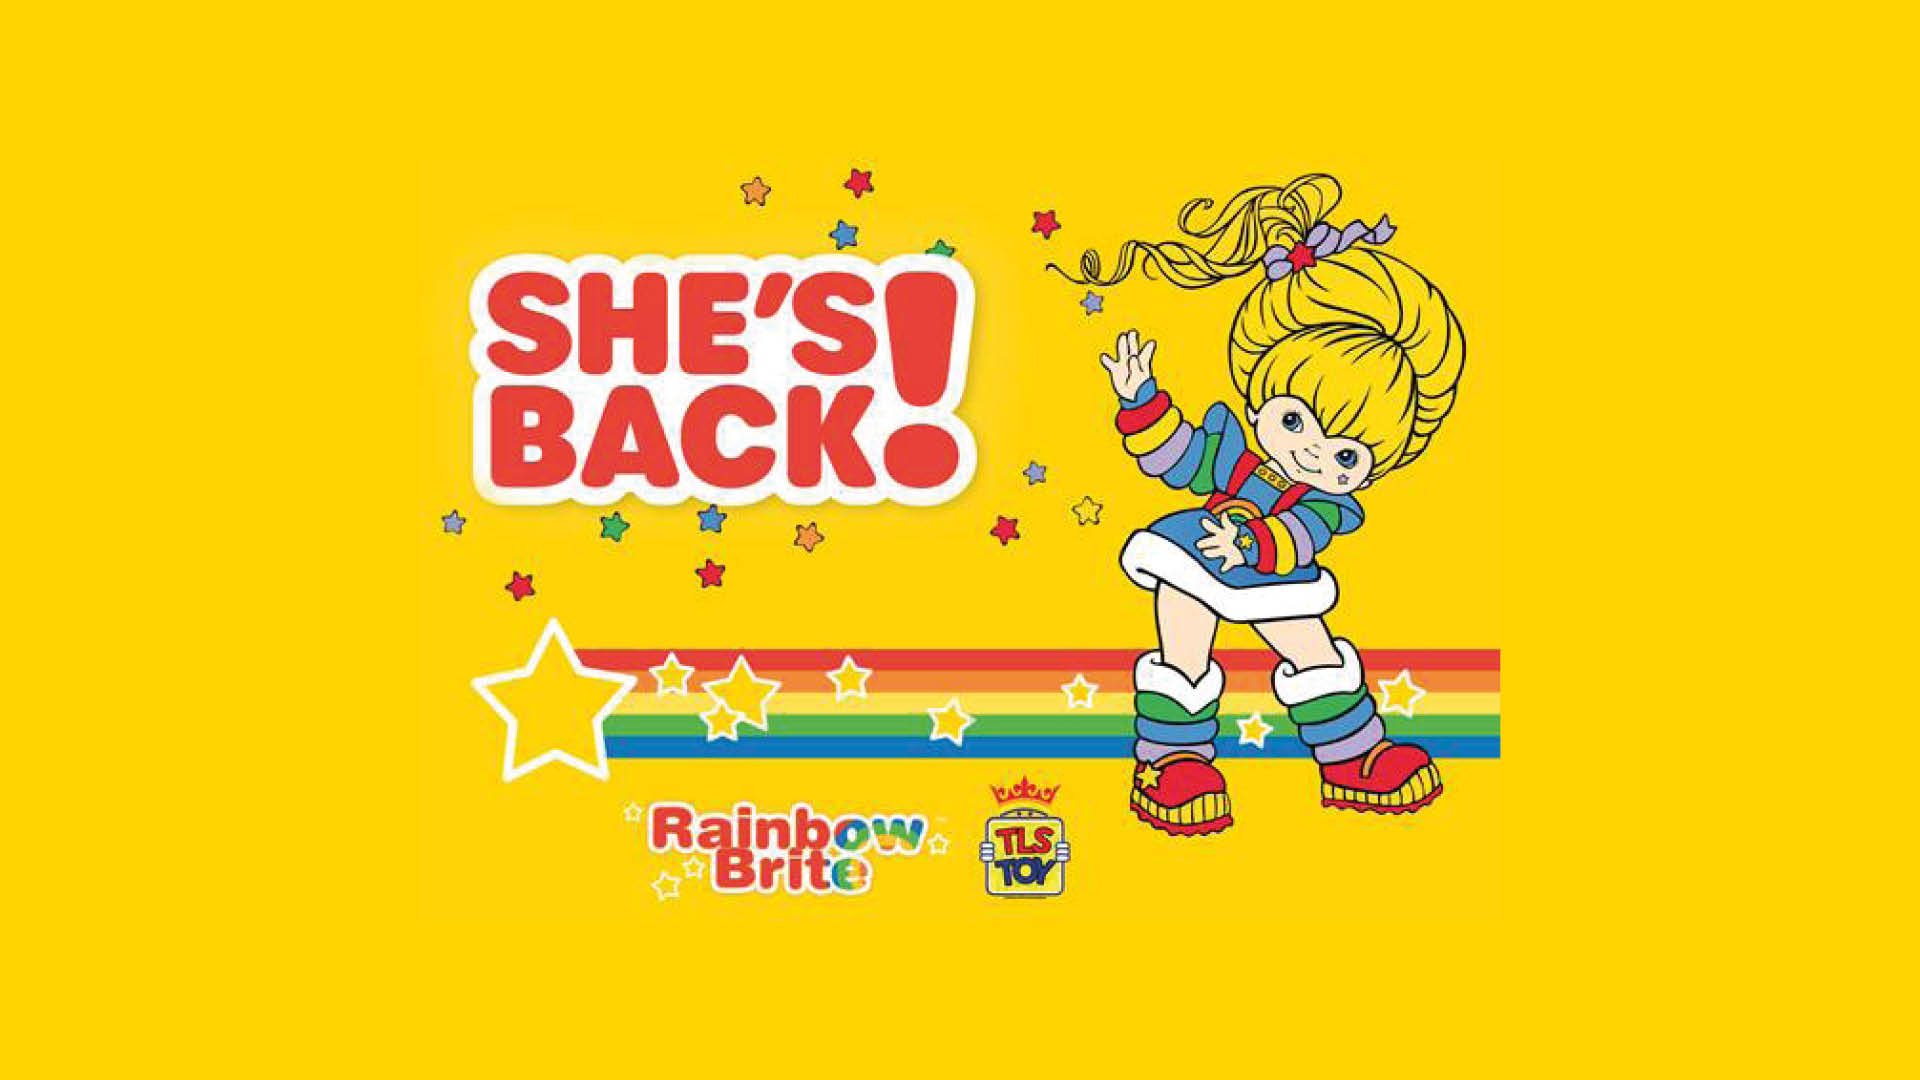 The Loyal Subjects Toy Partners with Hallmark for Rainbow Brite